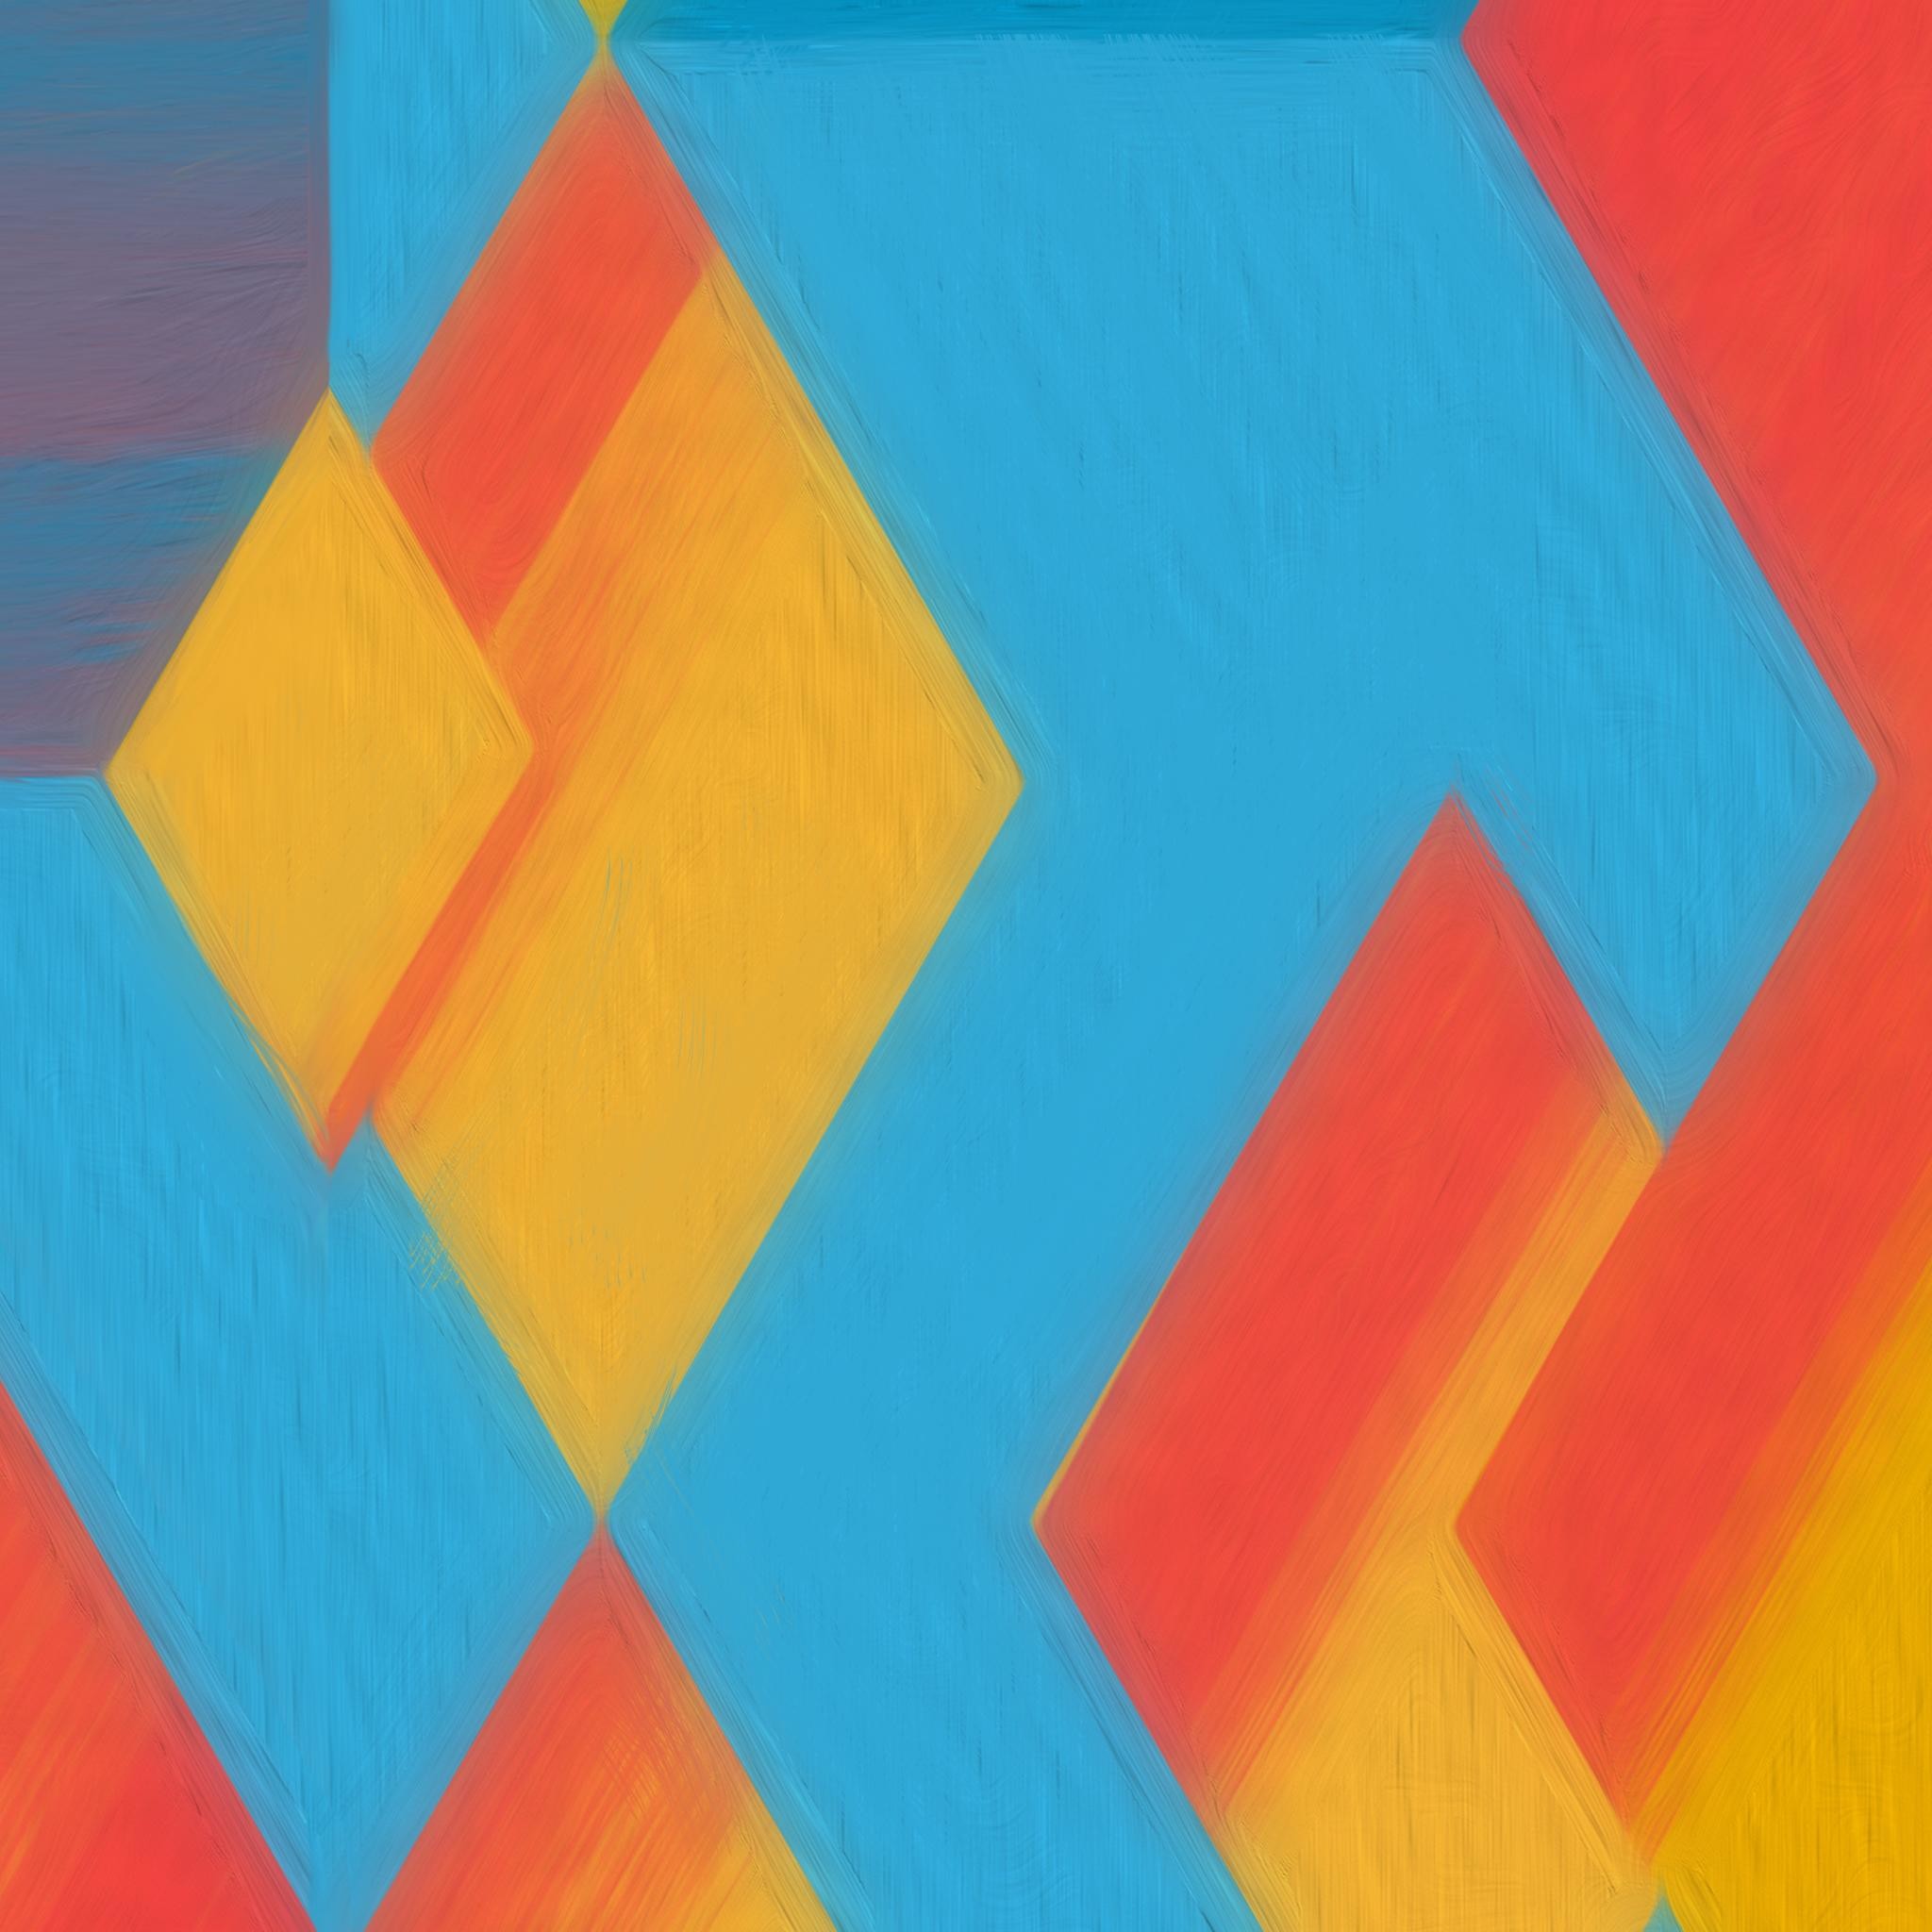 2048x2048 Download: The New Official Nexus 5 Wallpapers